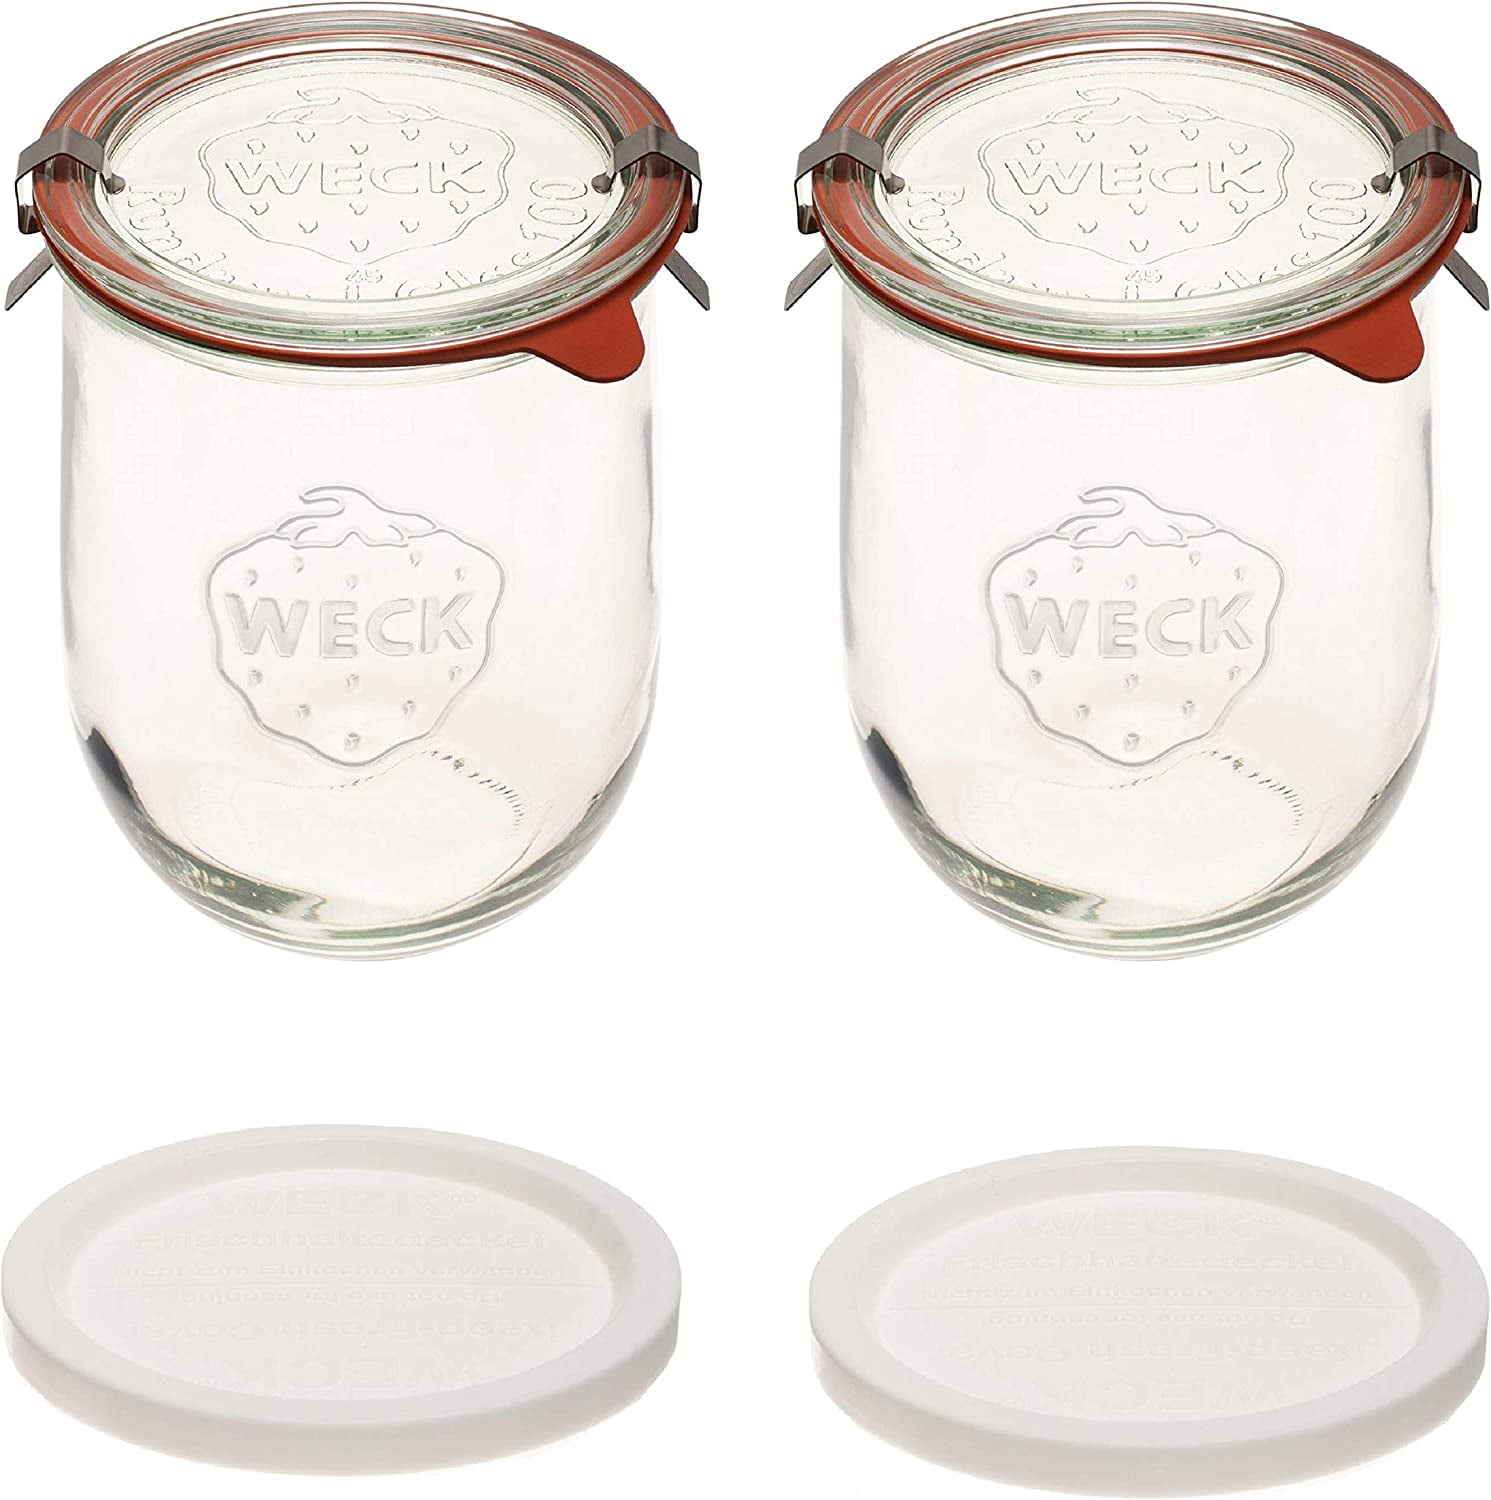 Glass Lids Large Sour Dough Starter Jars Weck Tulip Jars 1 Liter Weck Jars Tulip Jar with Wide Mouth 2 Sourdough Jars with Suitable for Canning and Storage 